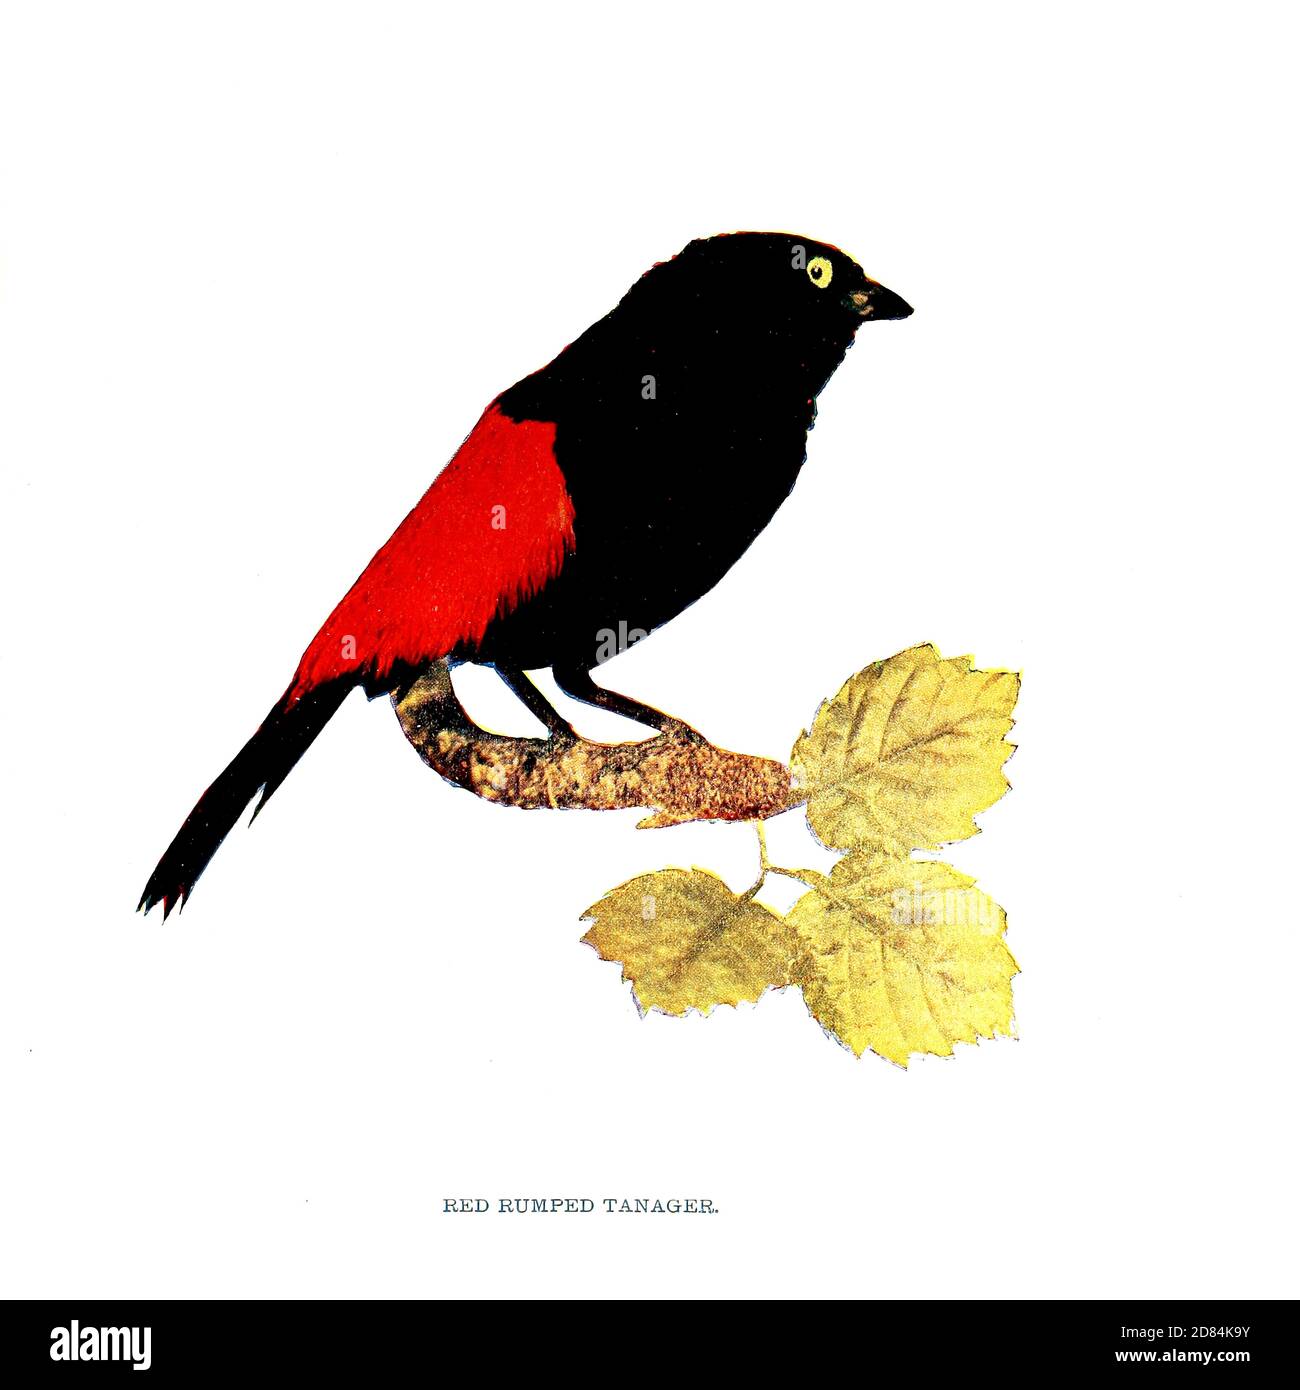 Scarlet-rumped tanager [Here as Red Rumped Tanager] (Ramphocelus passerinii) is a medium-sized passerine bird. This tanager is a resident breeder in the Caribbean lowlands from southern Mexico to western Panama. From Birds : illustrated by color photography : a monthly serial. Knowledge of Bird-life Vol 1 No 1 January 1897 Stock Photo